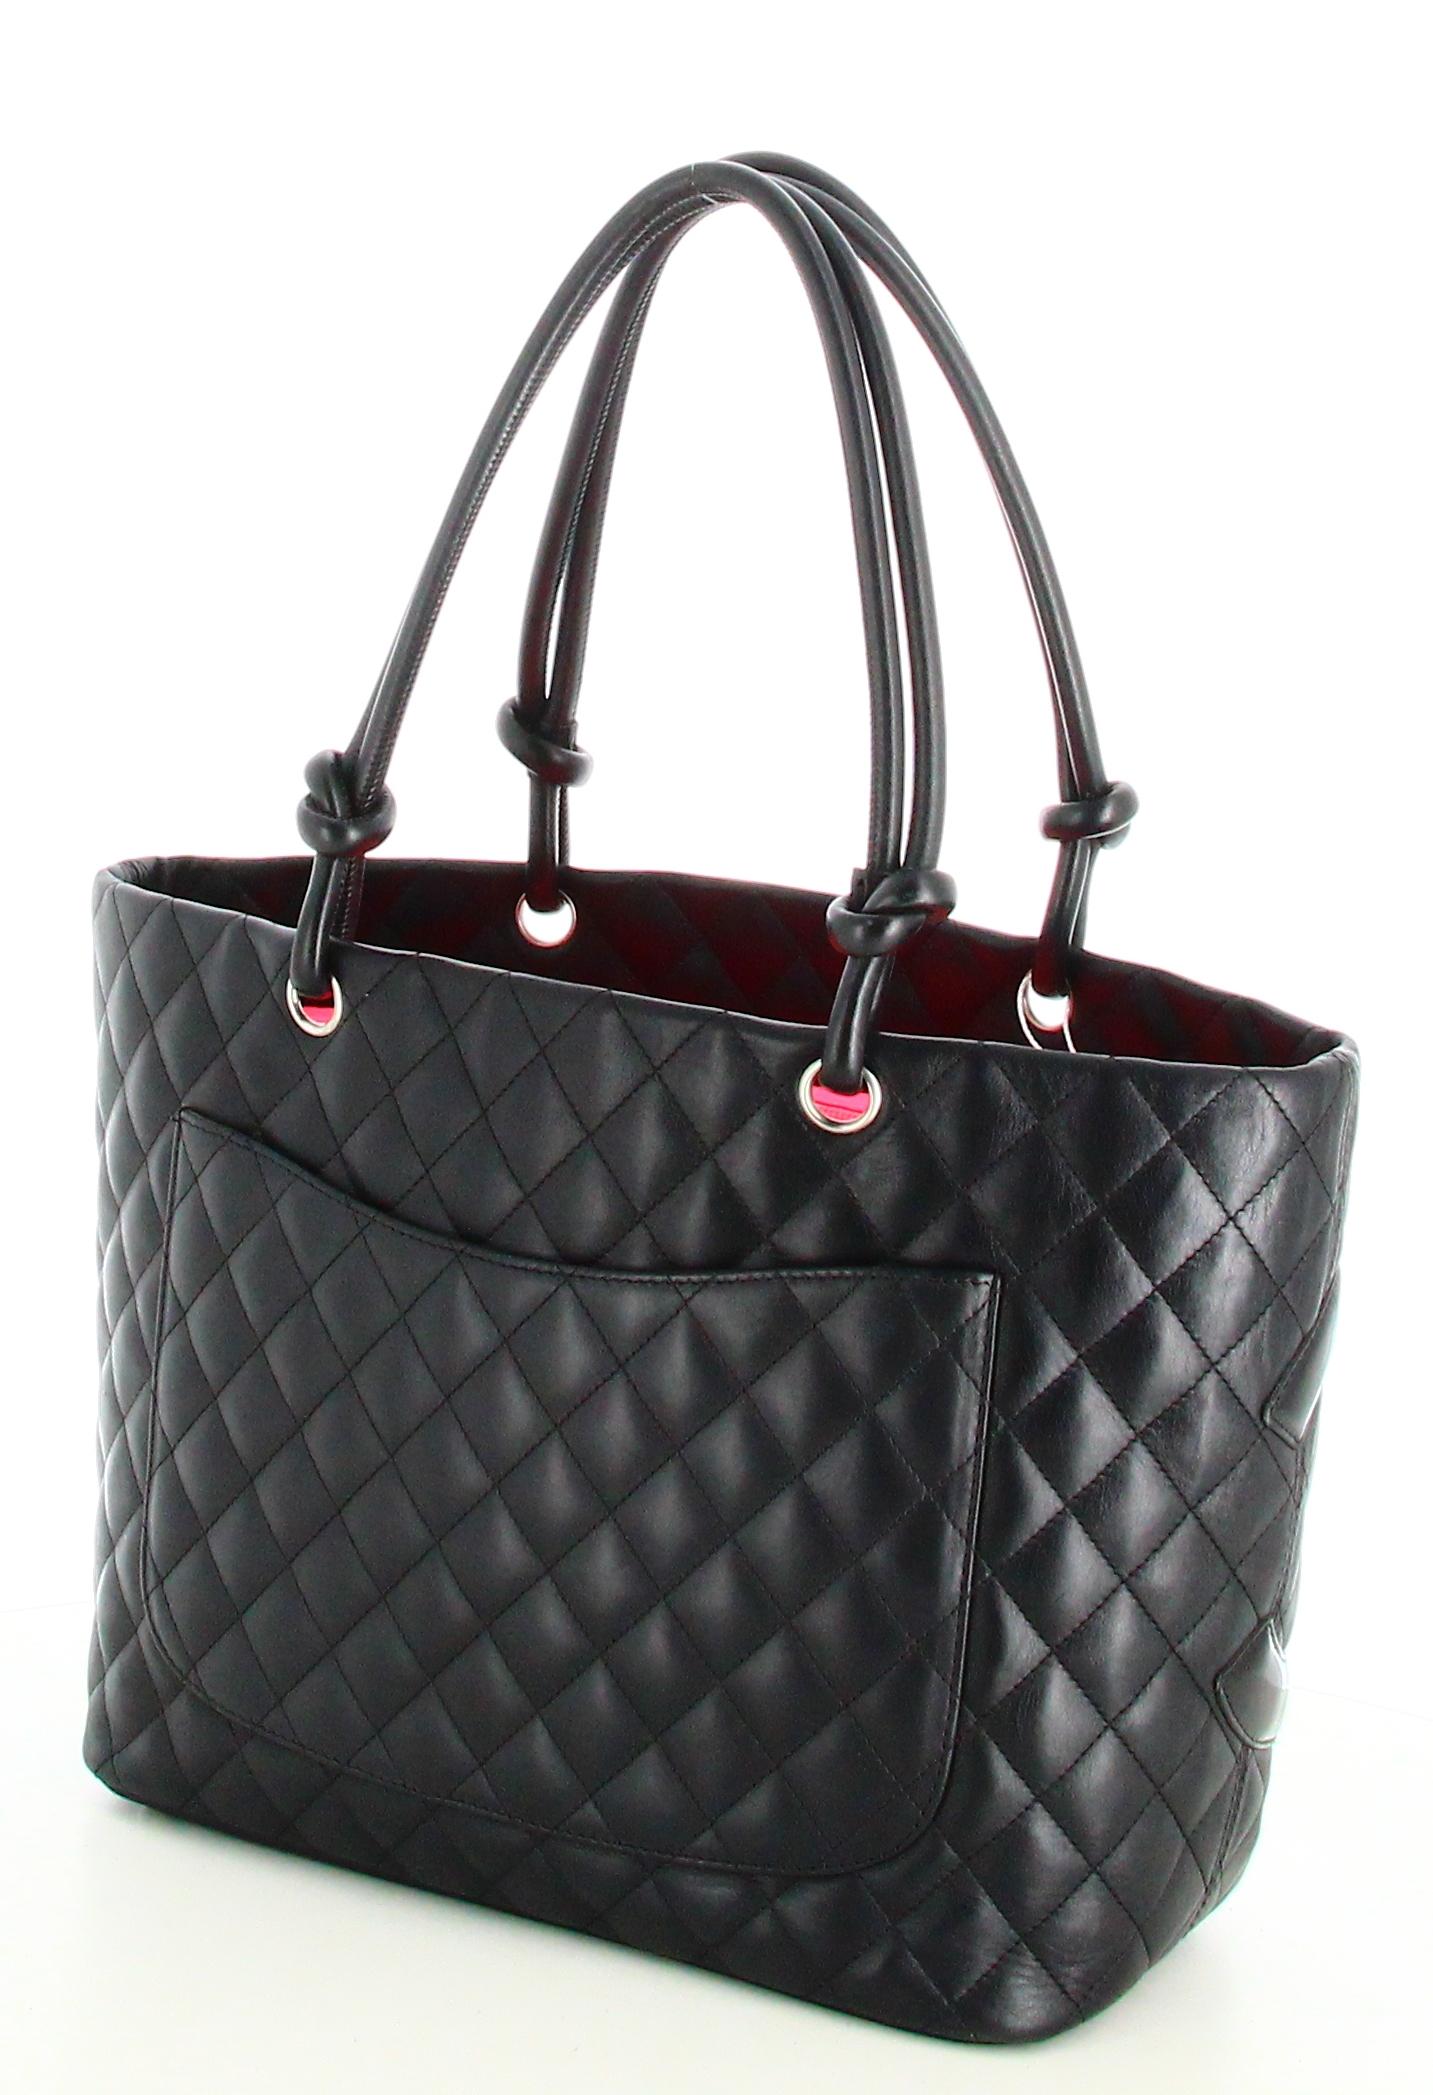 Chanel Handbag Black Leather Large Quilted Cambon Tote Line For Sale 1